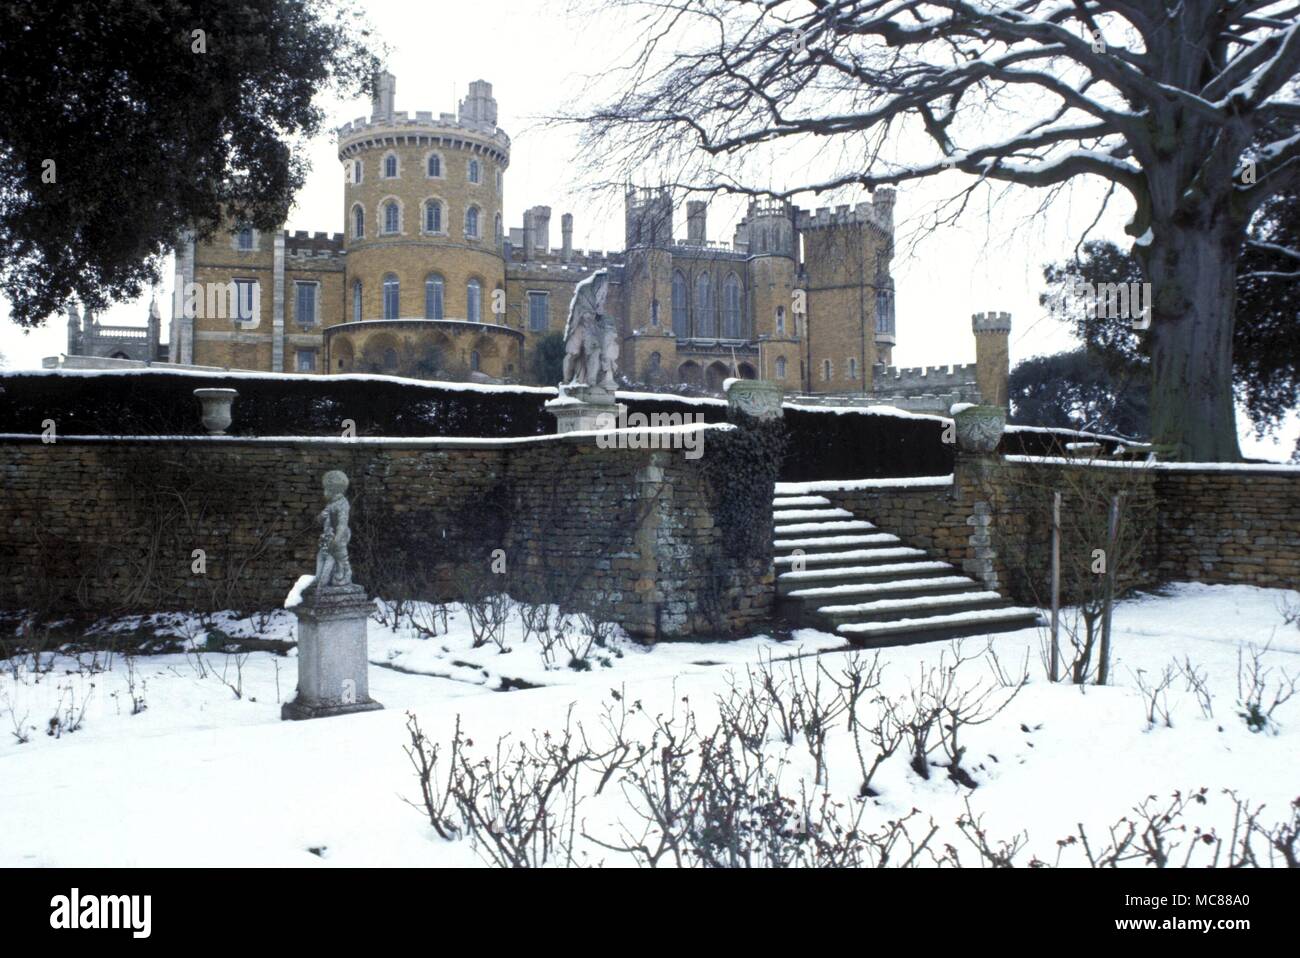 Belvoir castle in the snow. The so-called Bottesford Witches wewre supposed to have murdered the sons of the 6th Earl of Rutland (who owned Belvoir Castle) here. witchcraft site Stock Photo